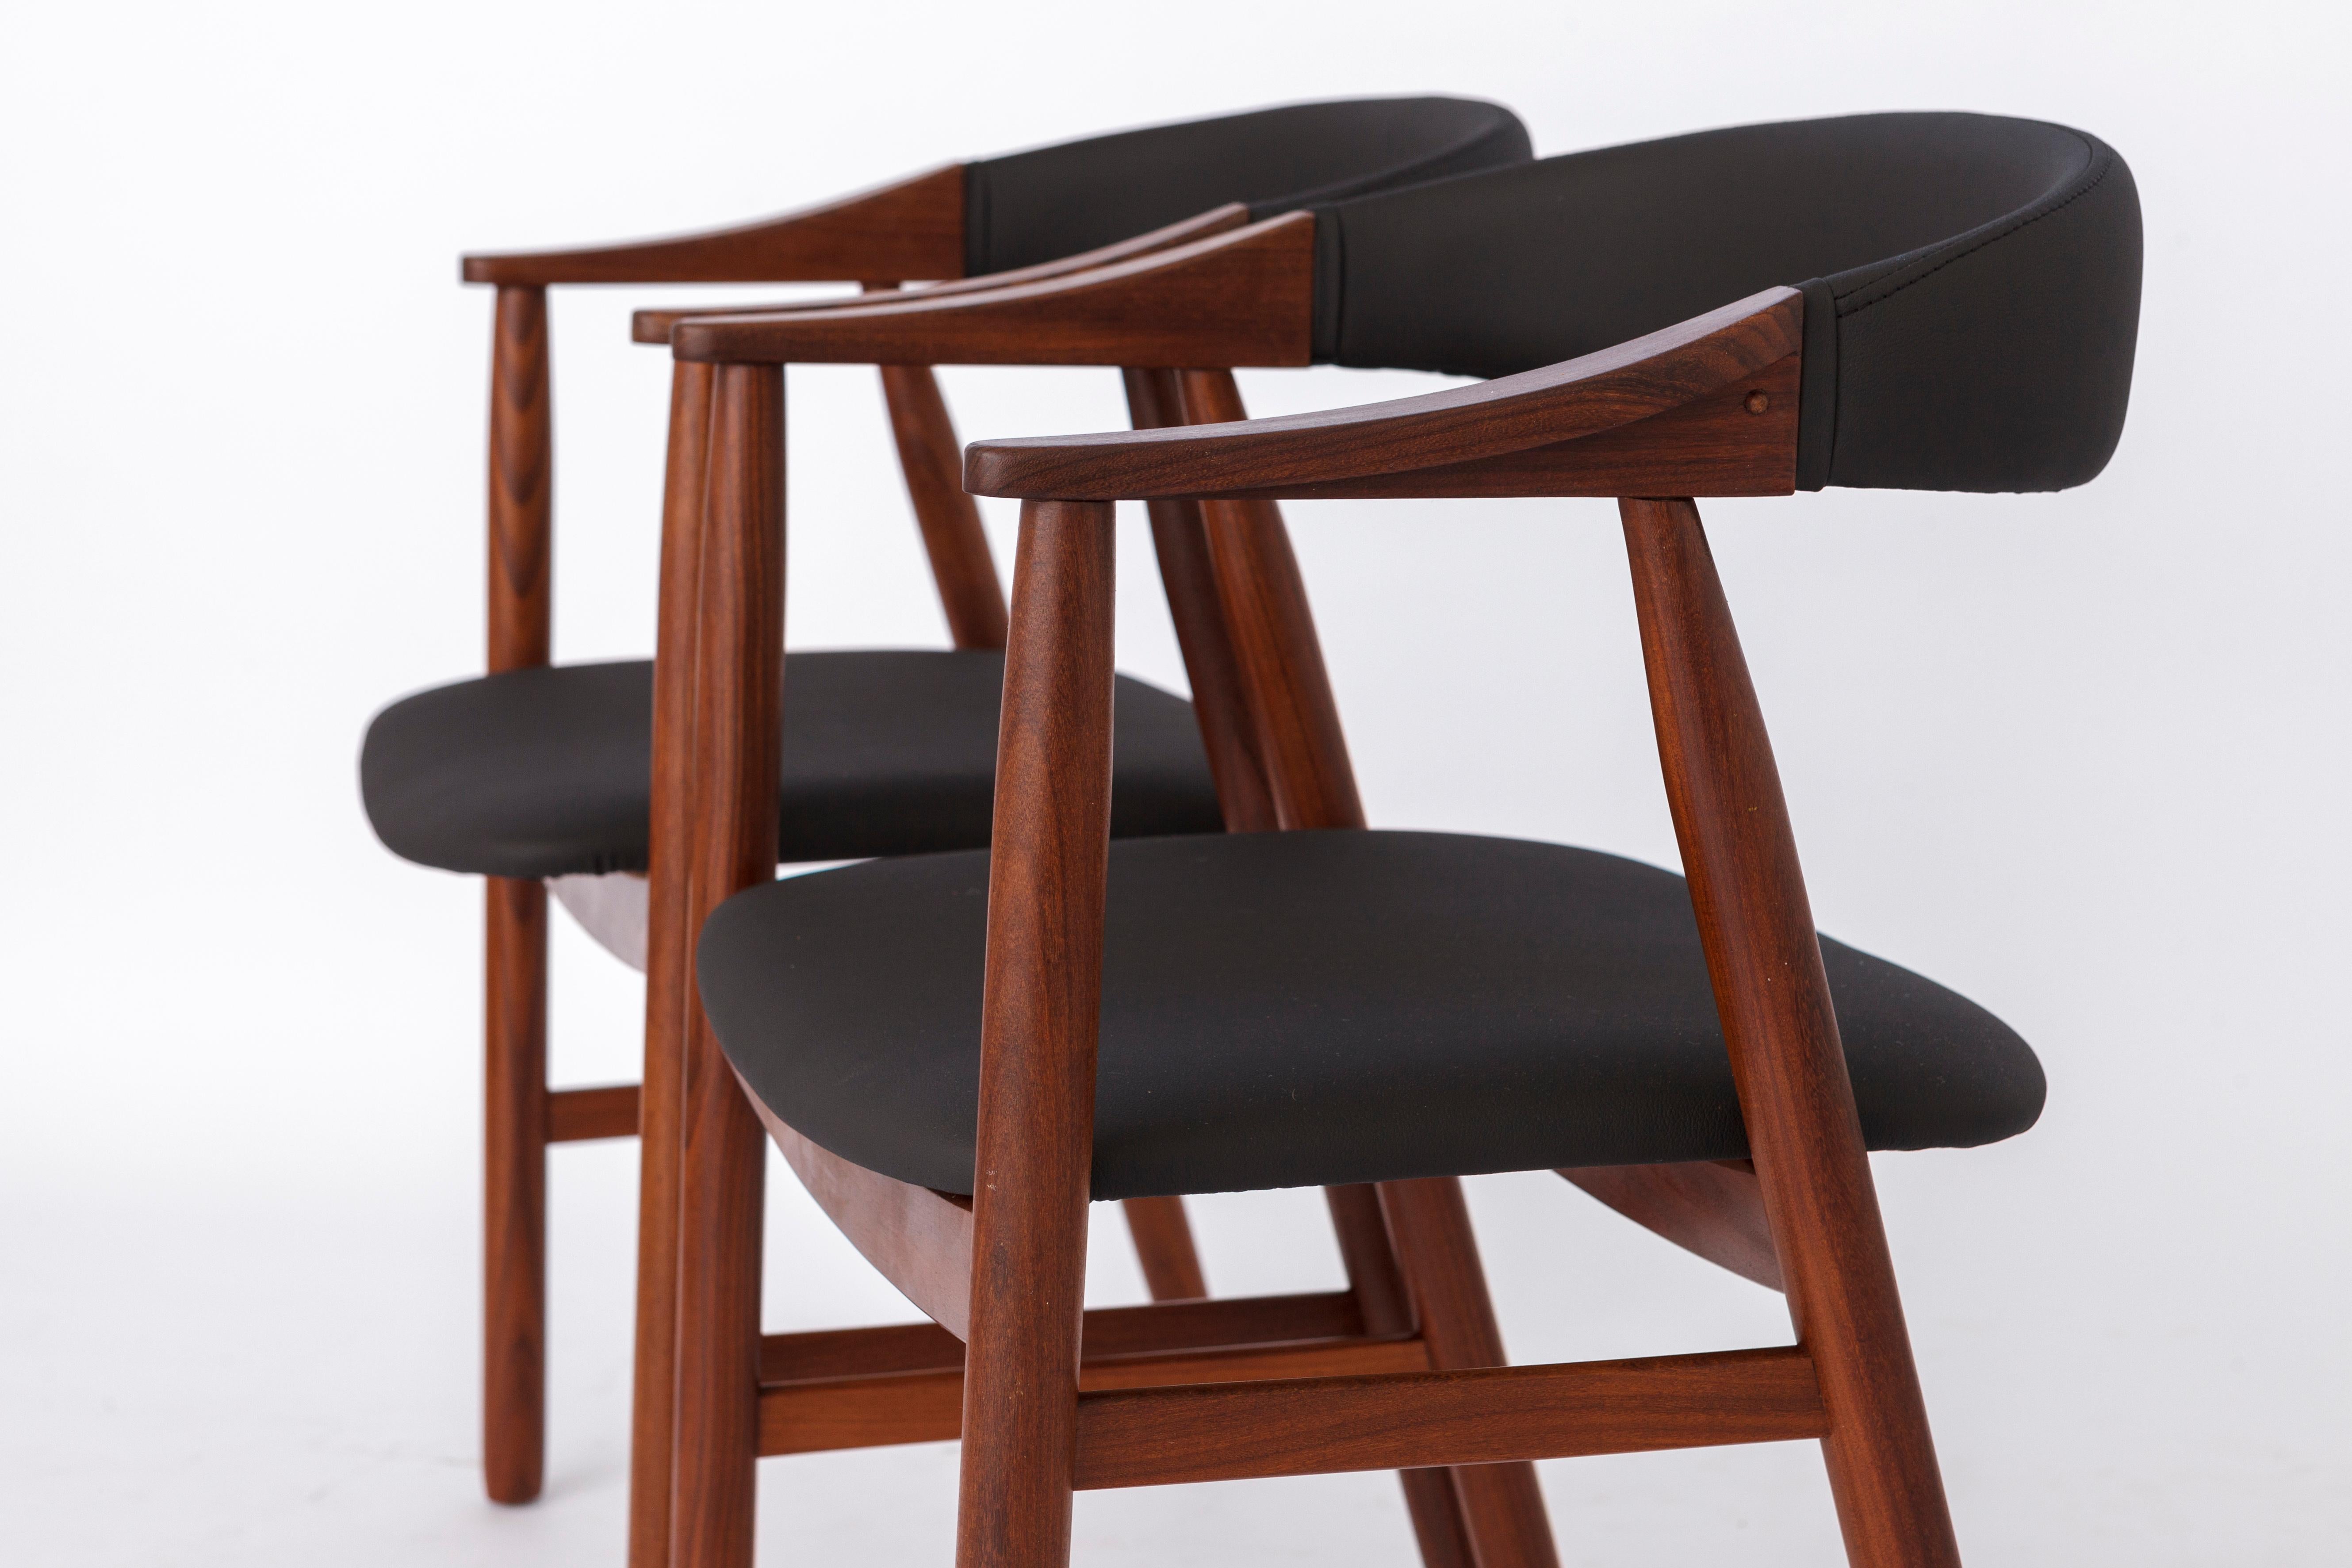 Mid-20th Century 2 Vintage Chairs by Thomas Harlev, Model 213, Danish, for Farstrup, Teak, 1960s. For Sale